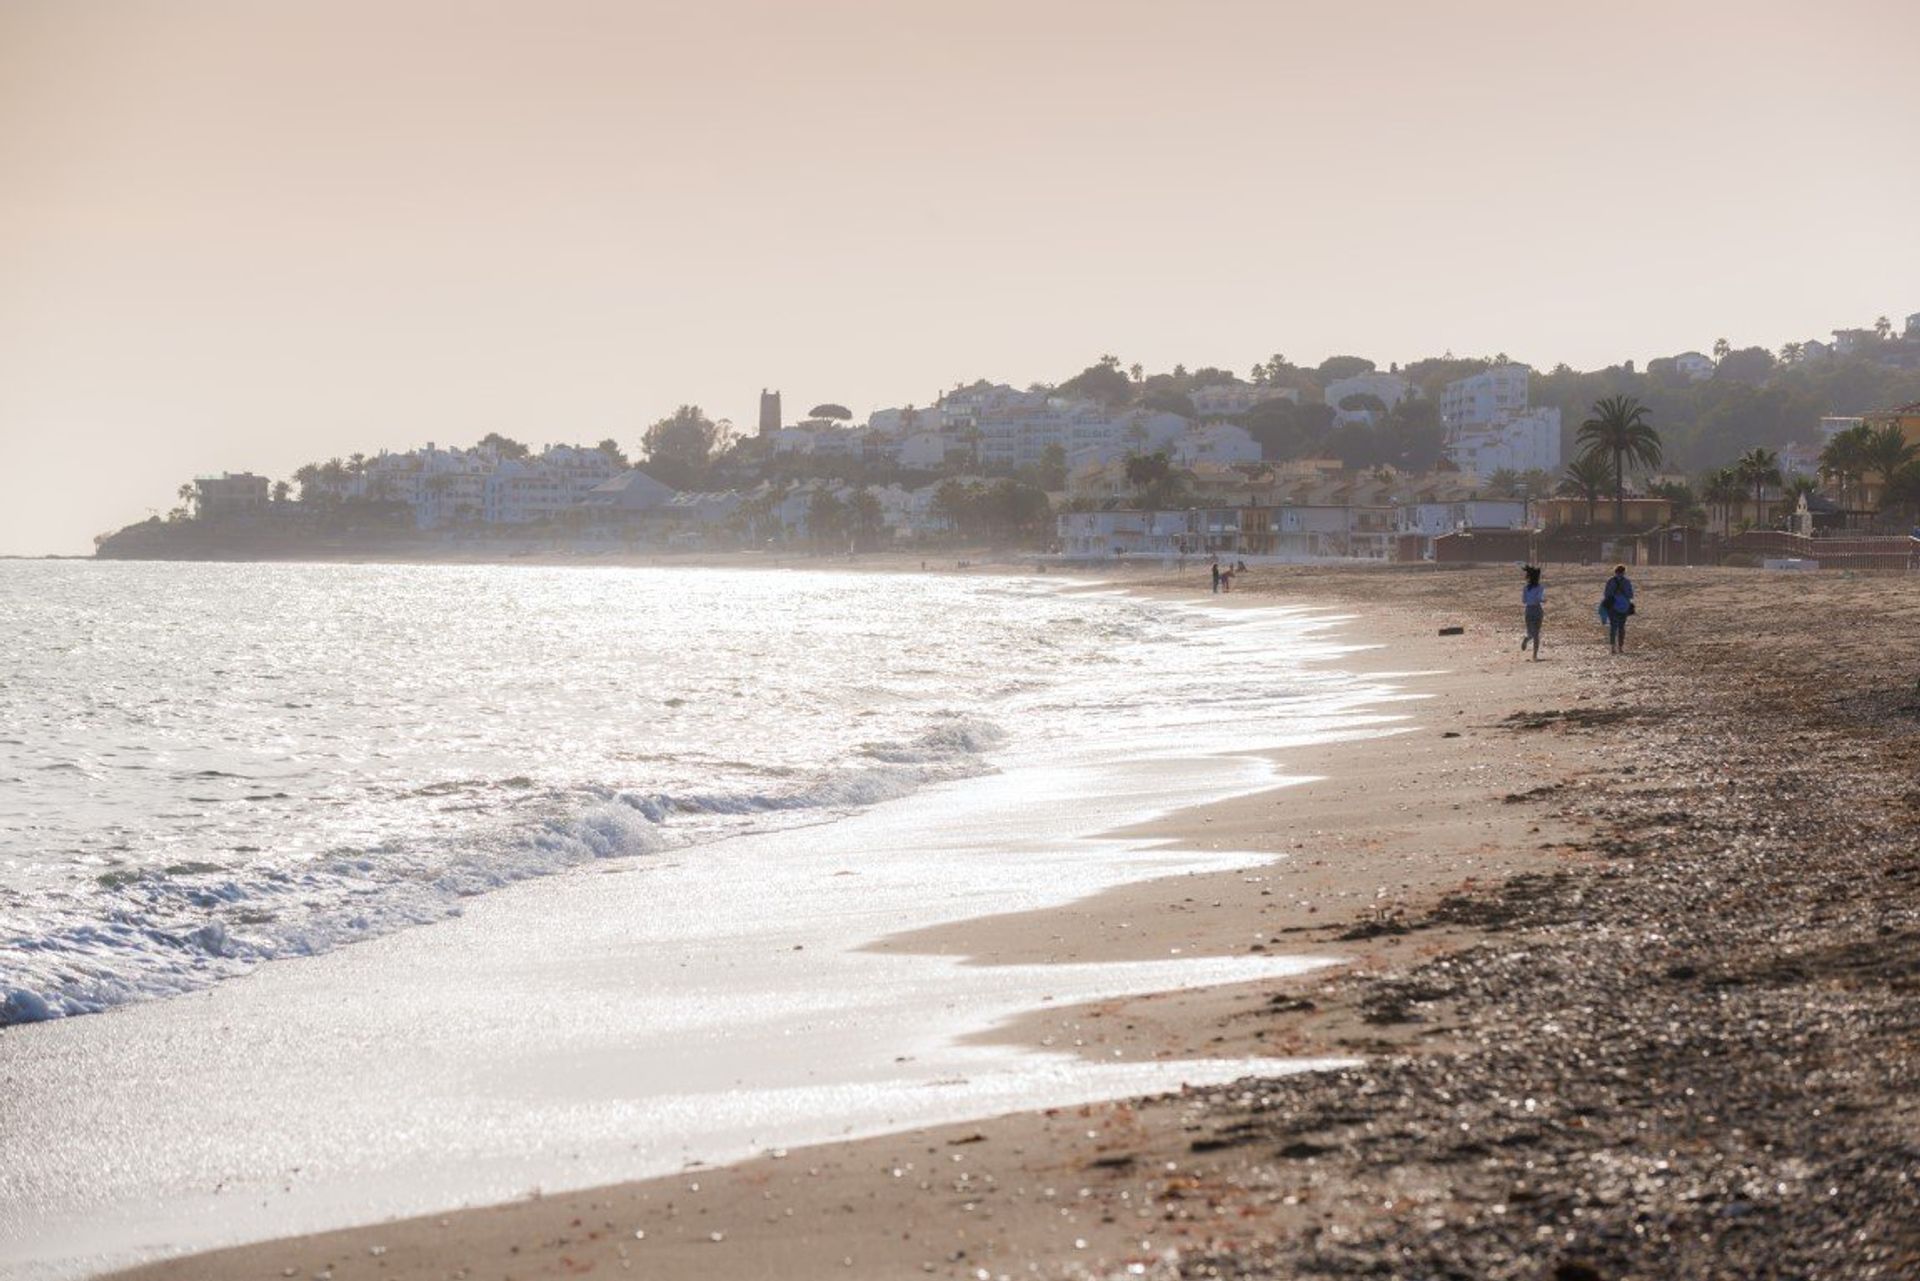 After a morning of leisure activities, sit back and unwind by the beaches of Cala de Mijas